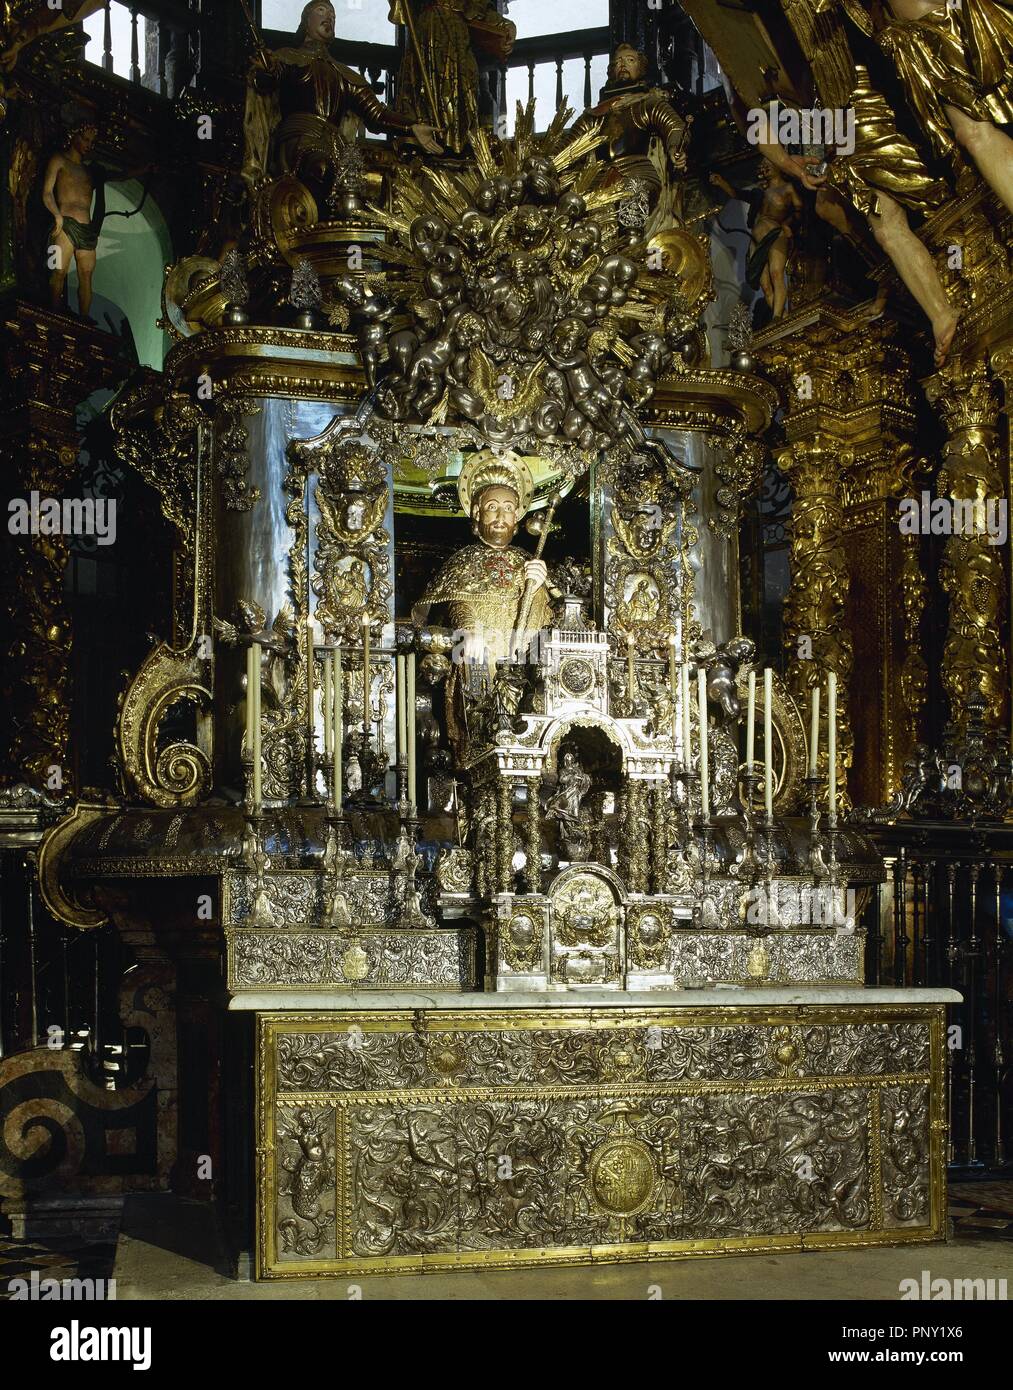 Main altar of the Cathedral of Santiago de Compostela. A bejeweled medieval stone statue of St. James (12th century). Remodeled, sitting on a silver chair and covered by a silver enclosure. Santiago de Compostela Cathedral. Santiago de Compostela, Province of La Coru–a, Galicia, Spain. Stock Photo